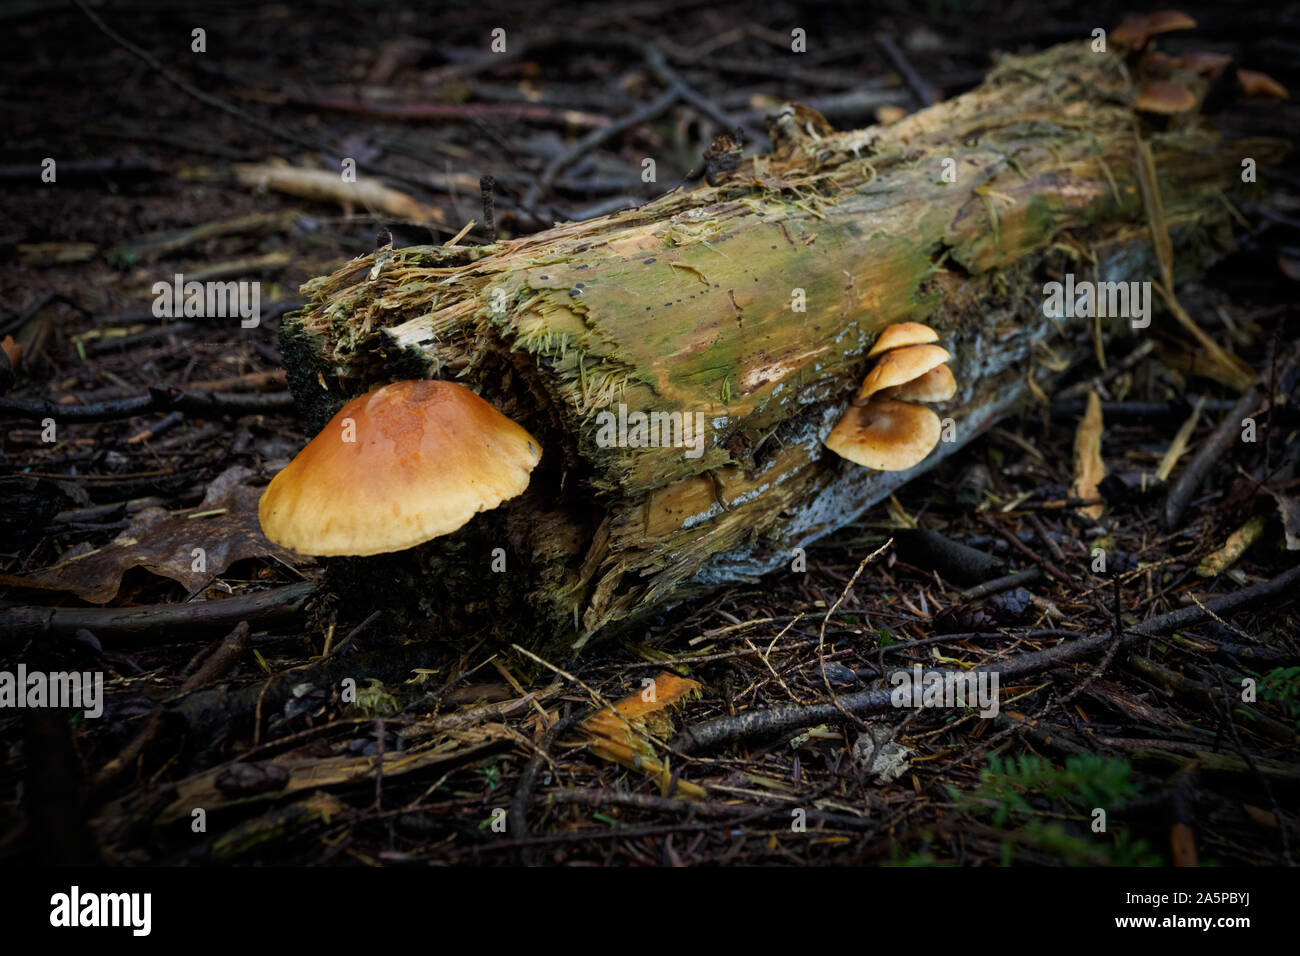 Wild mushroom growing in a dead tree trunk during the autumn Stock Photo